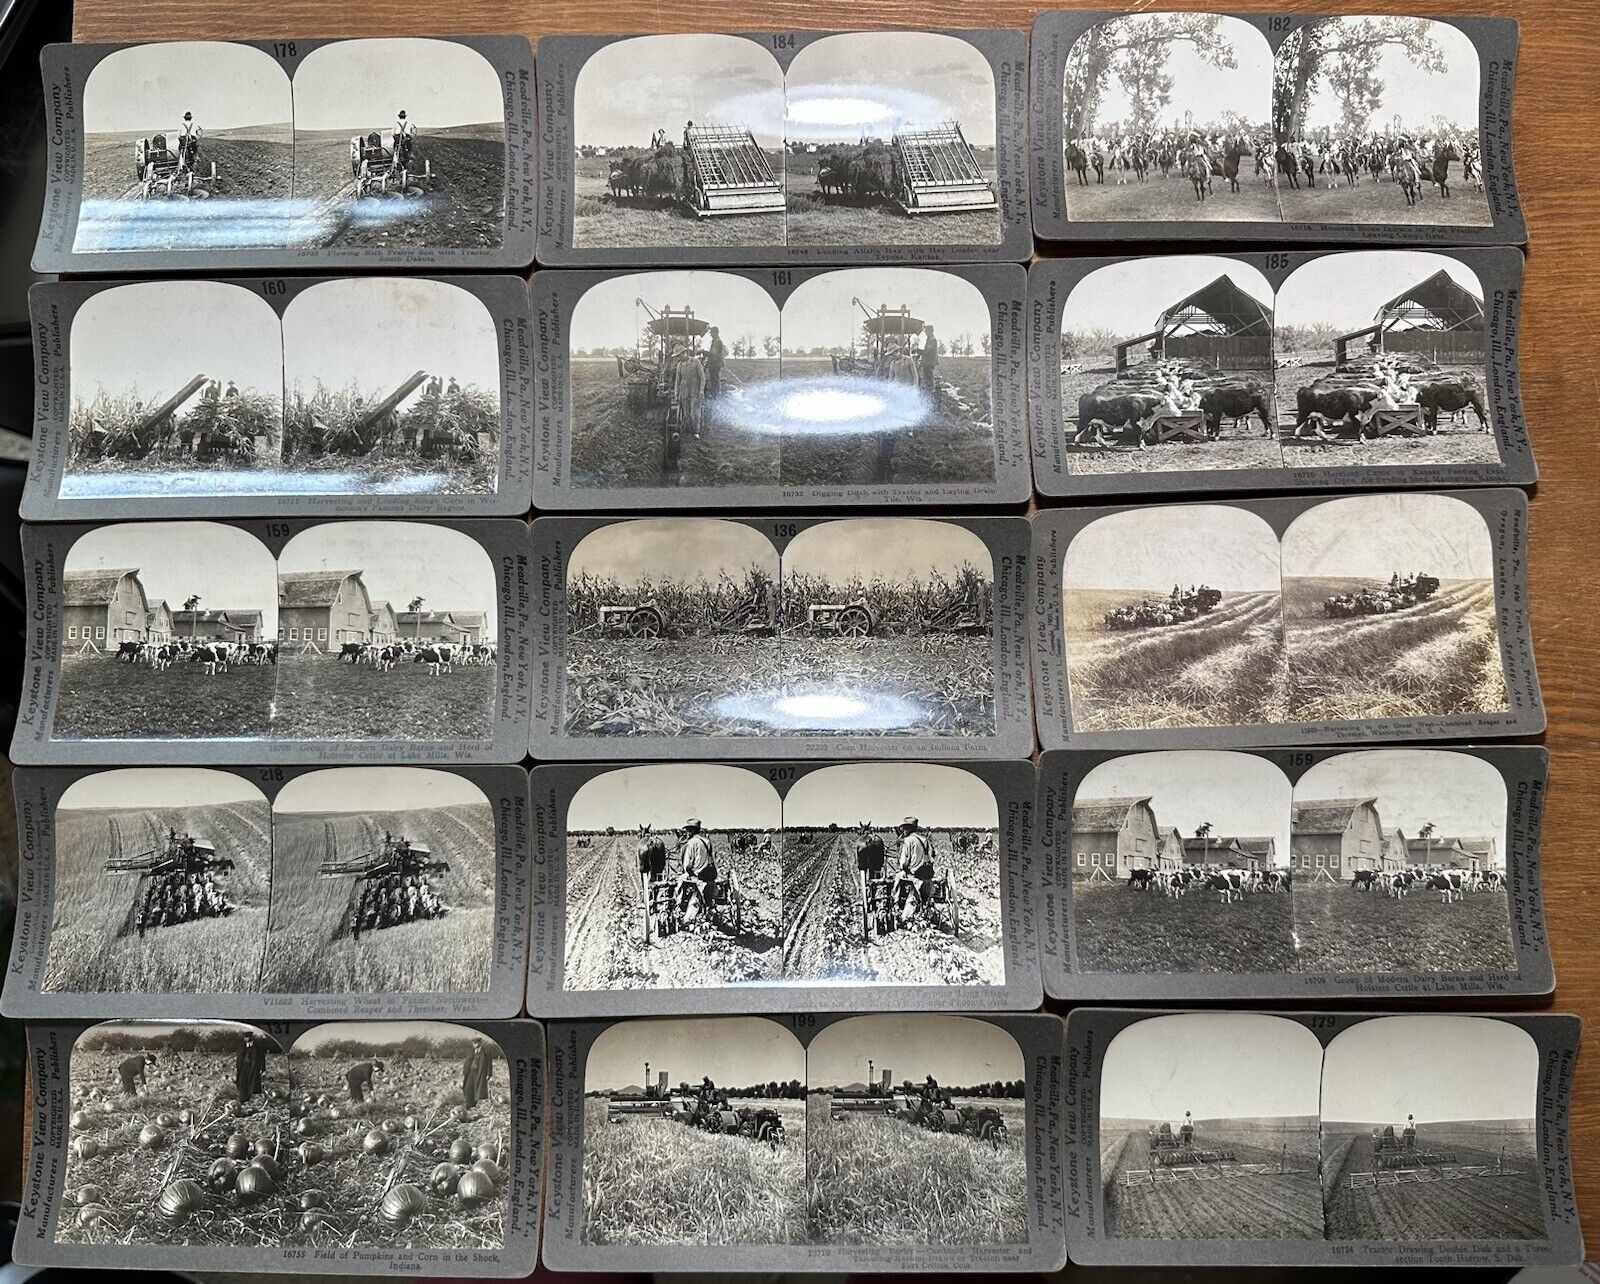 15 Keystone Farming Agriculture Antique Stereoscope Stereoscopic Card Stereoview